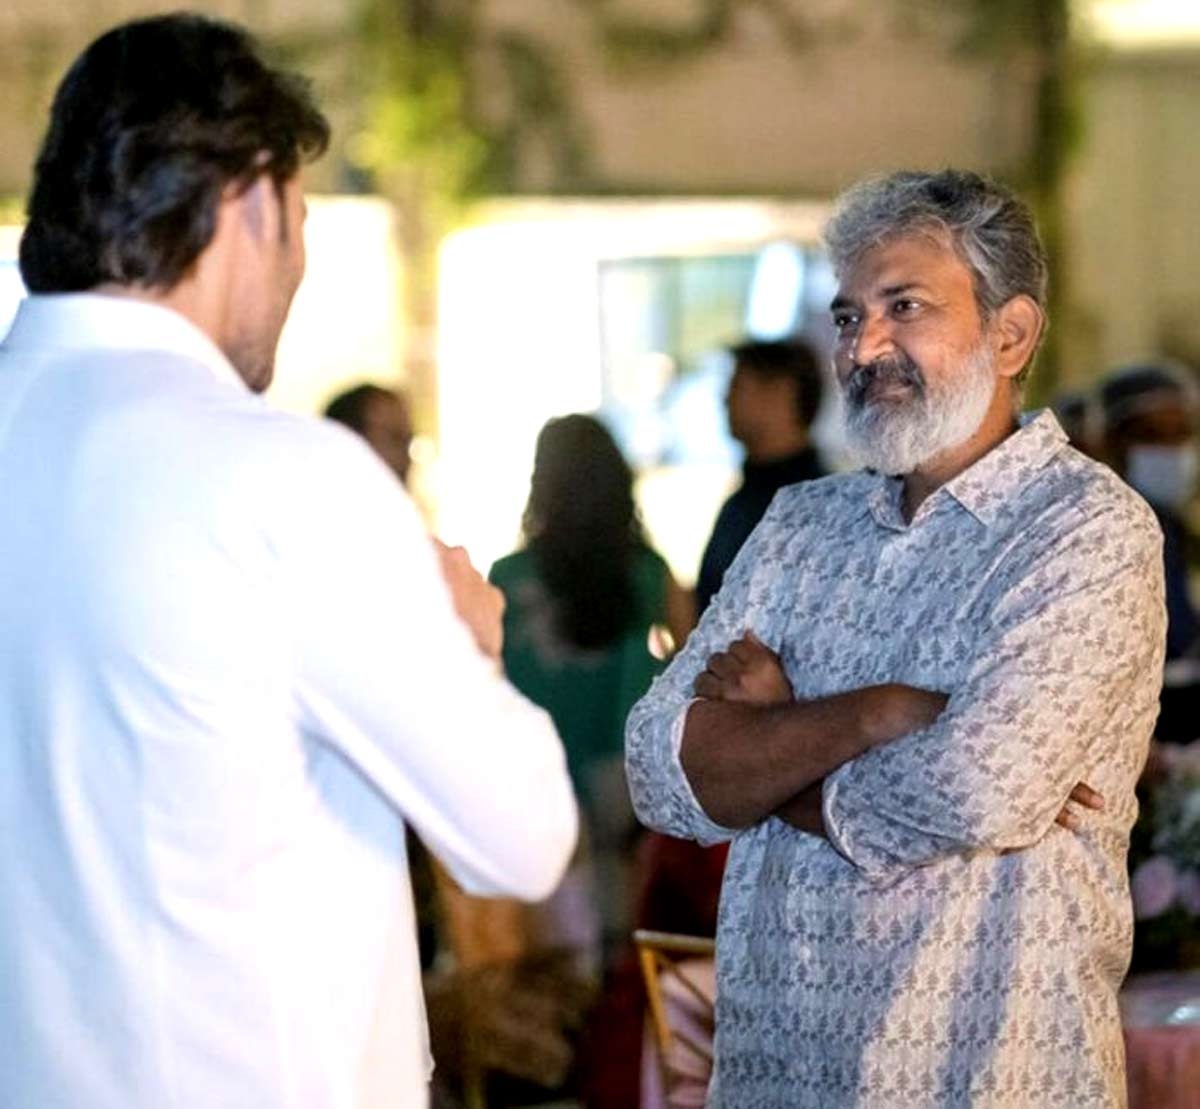 Fast-paced developments in the Mahesh-Rajamouli project